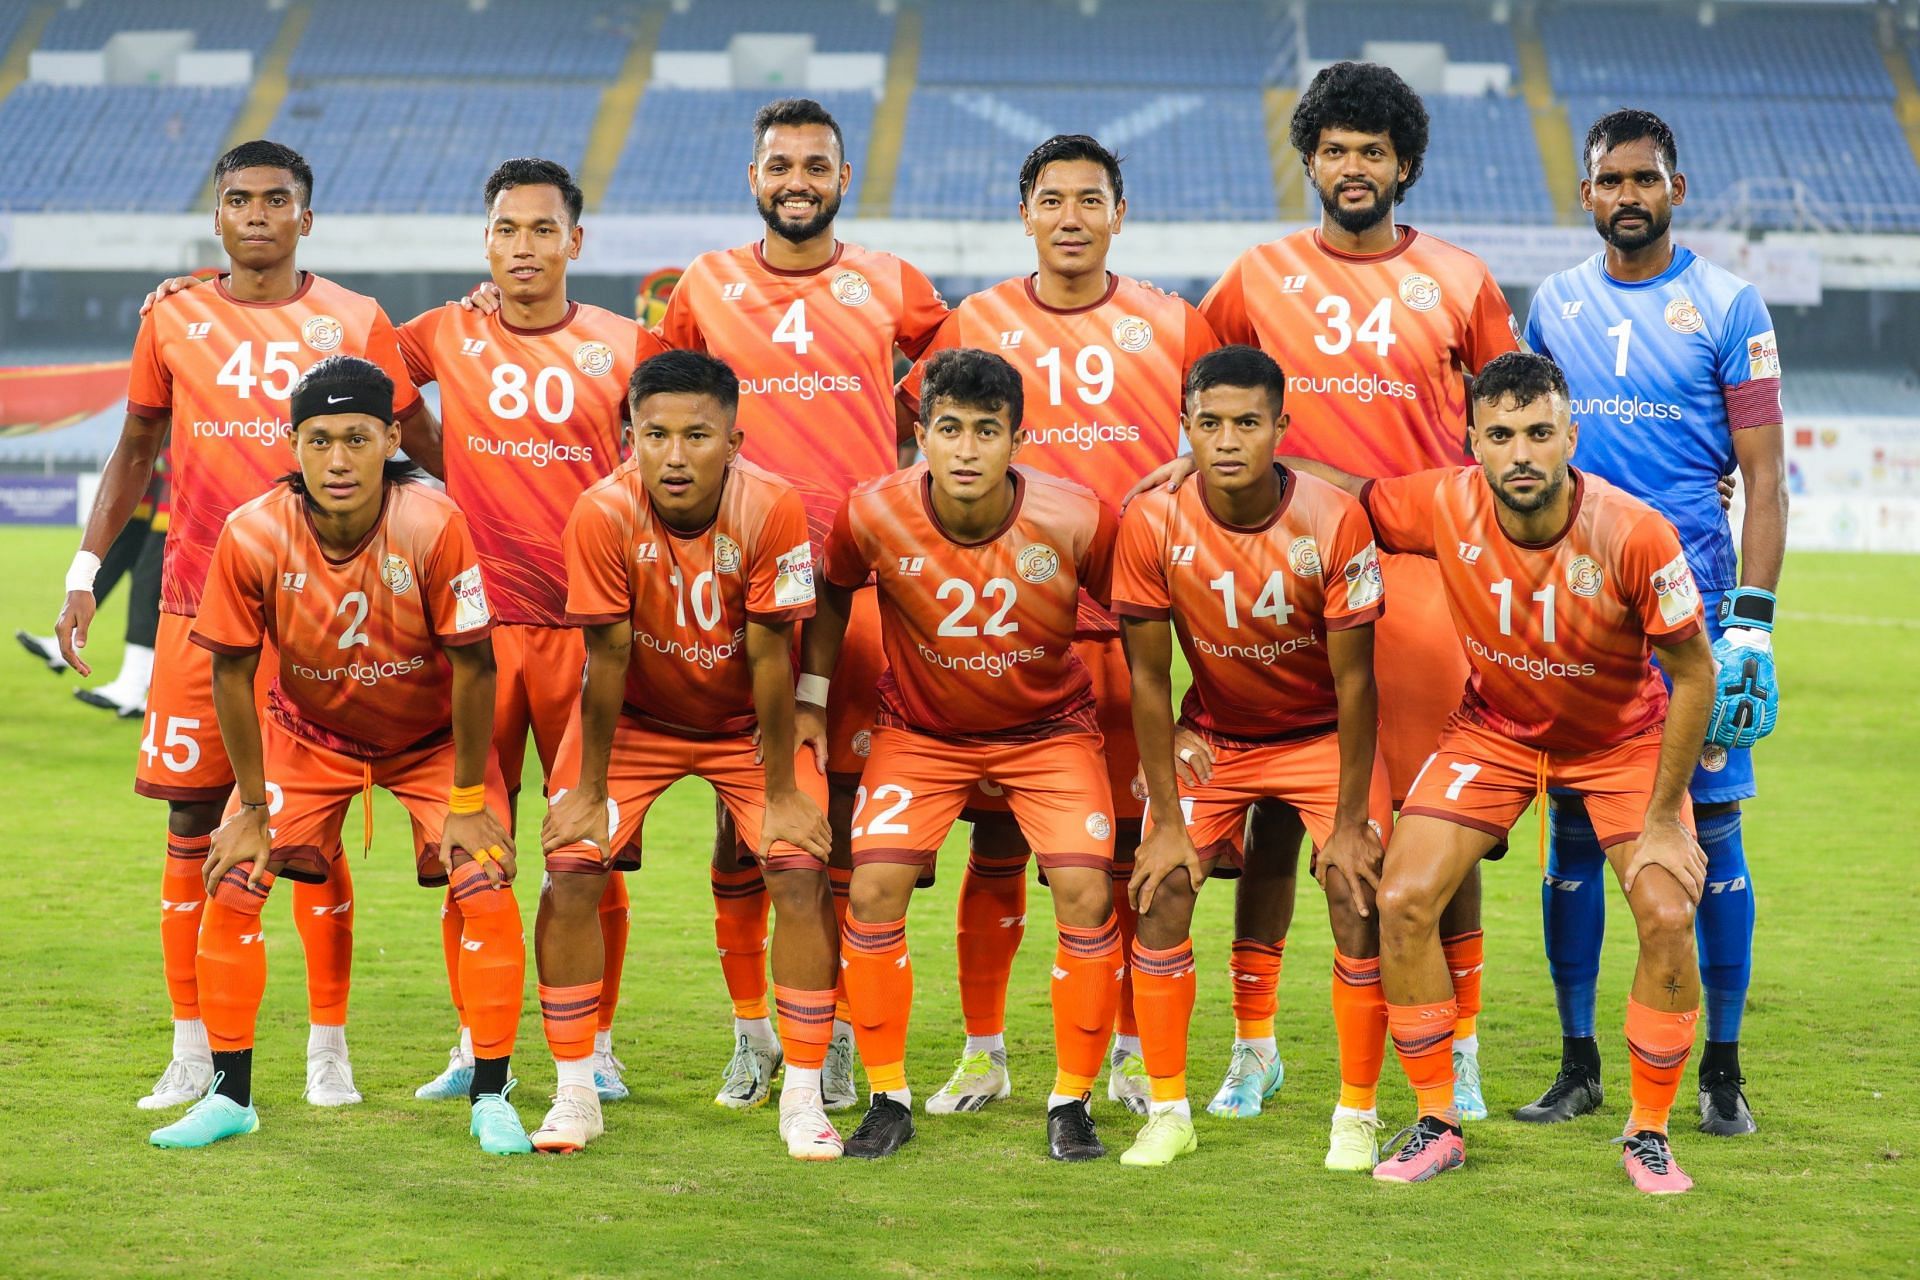 Punjab FC will make their debut appearance in the Indian Super League this season.